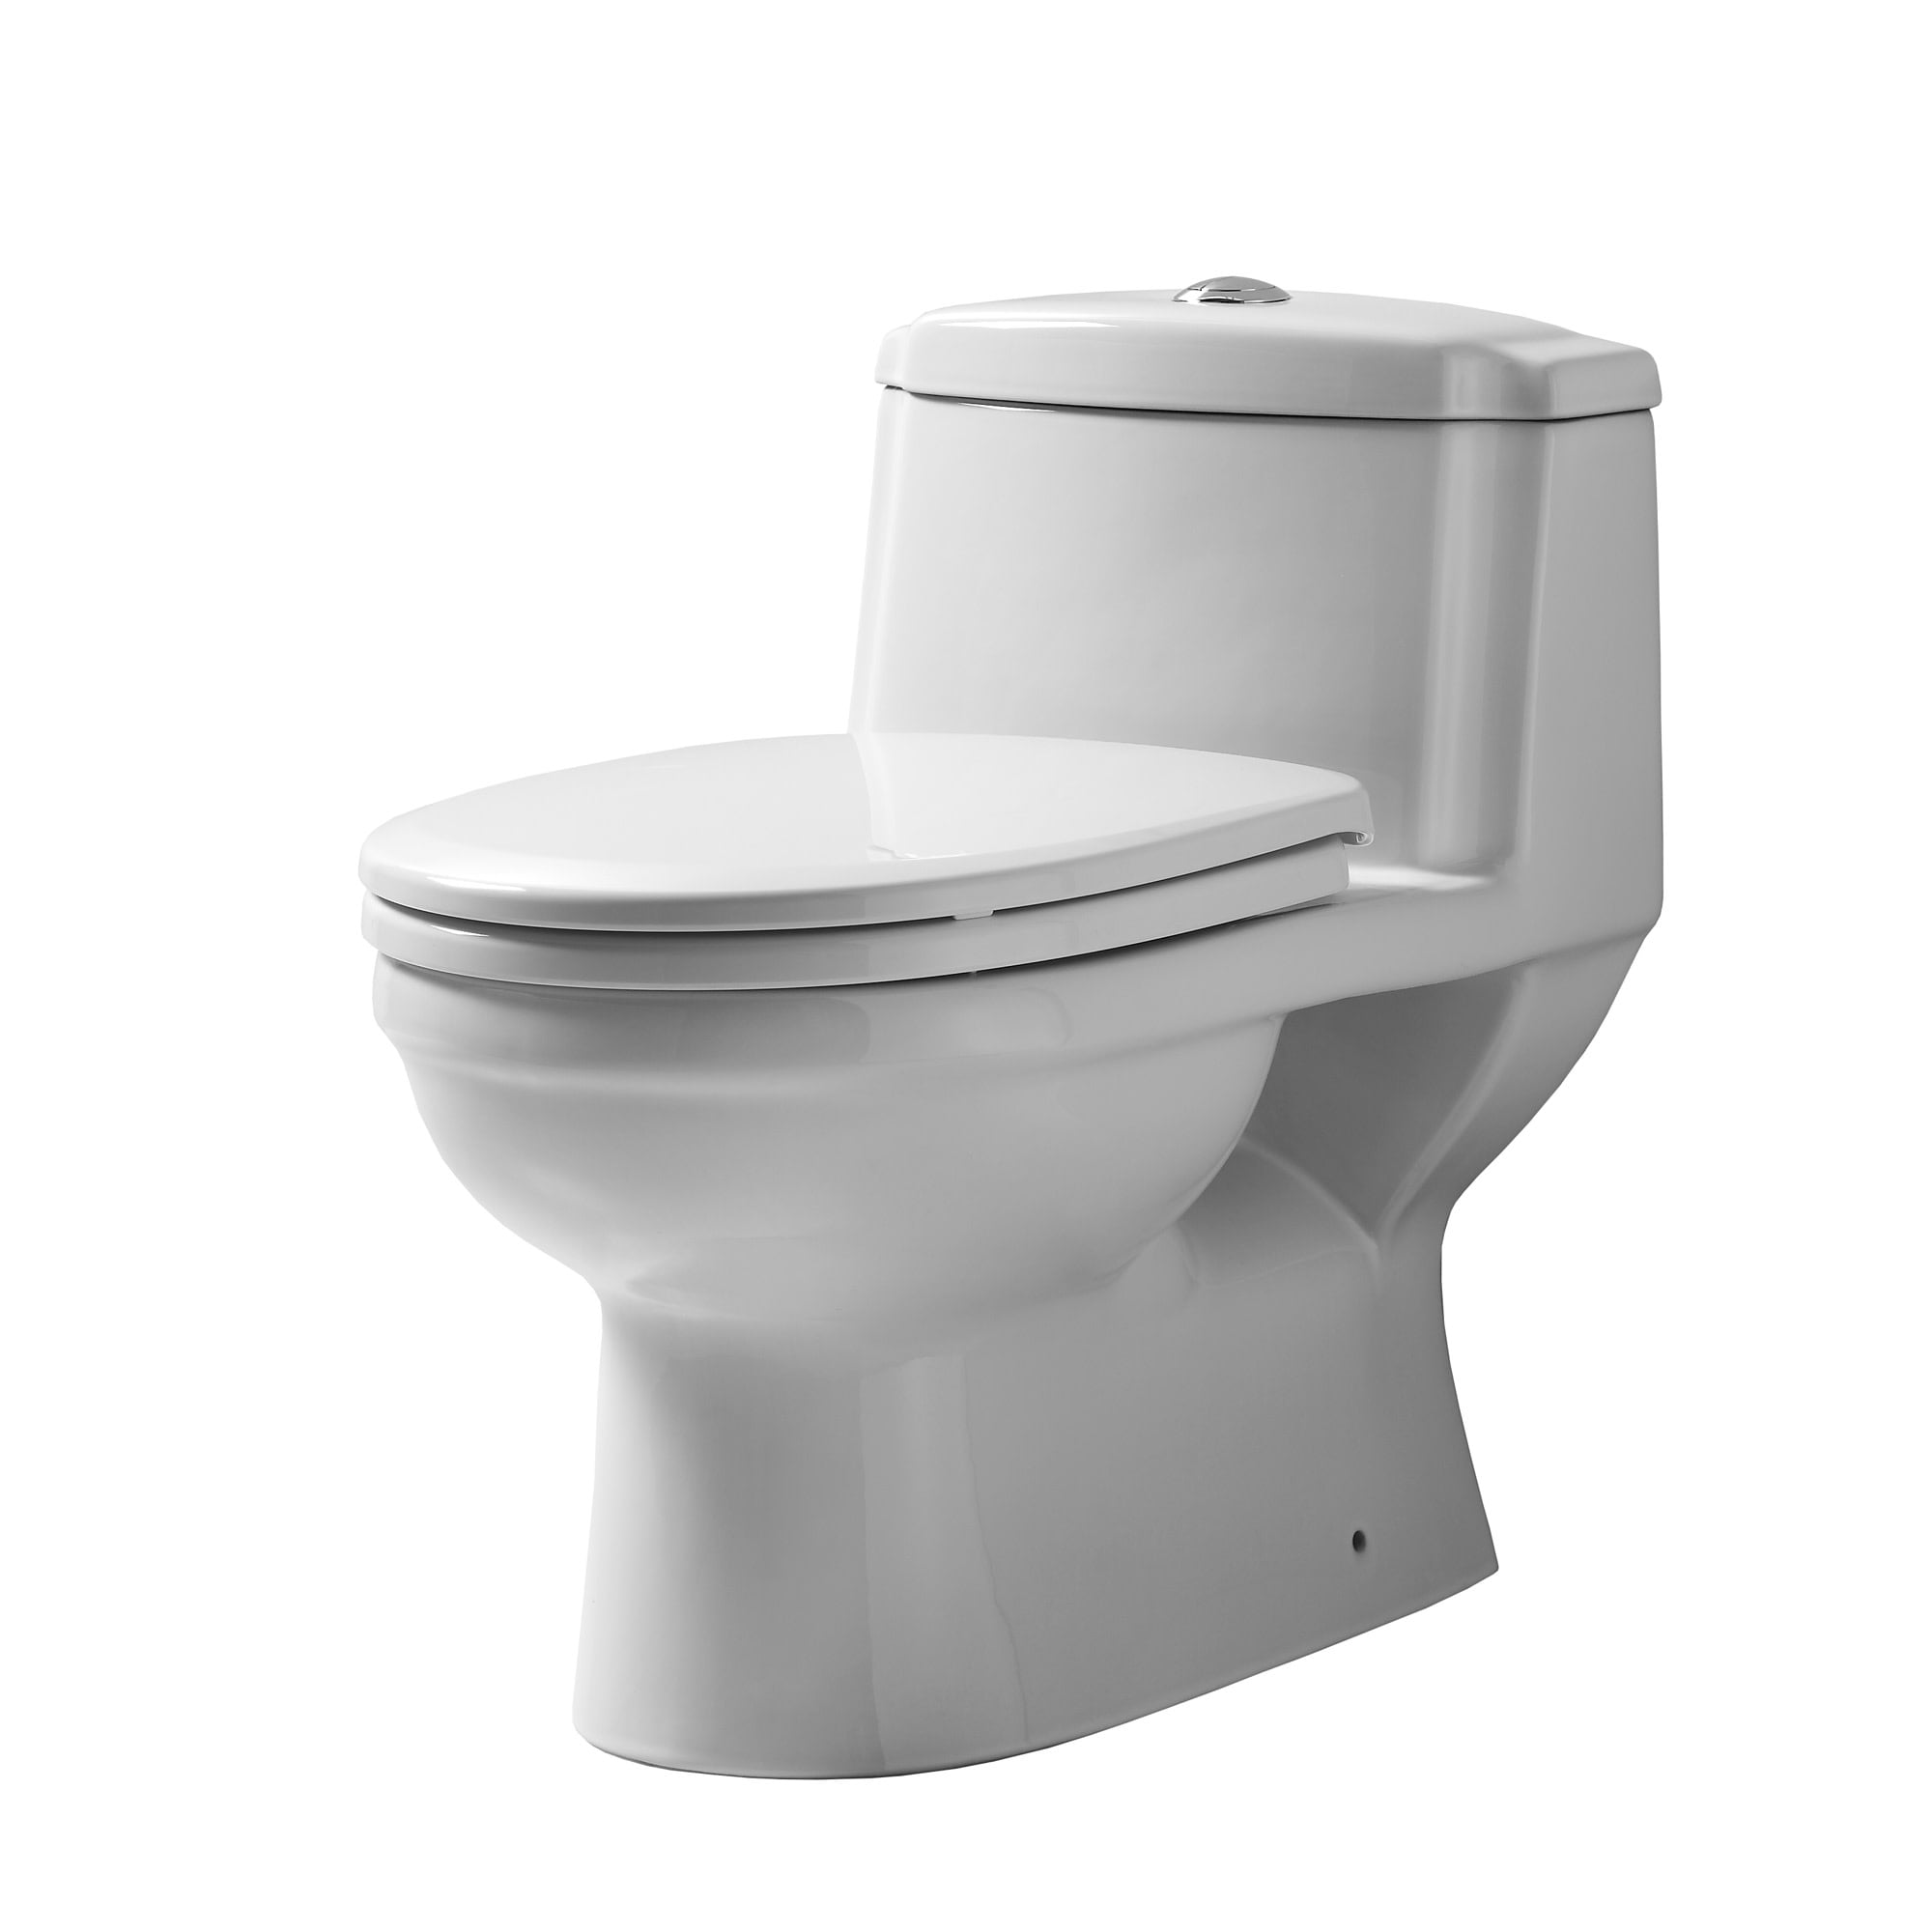 Whmfl3222-eb Magic Flush Eco-friendly One Piece Toilet With A Siphonic Action Dual Flush System